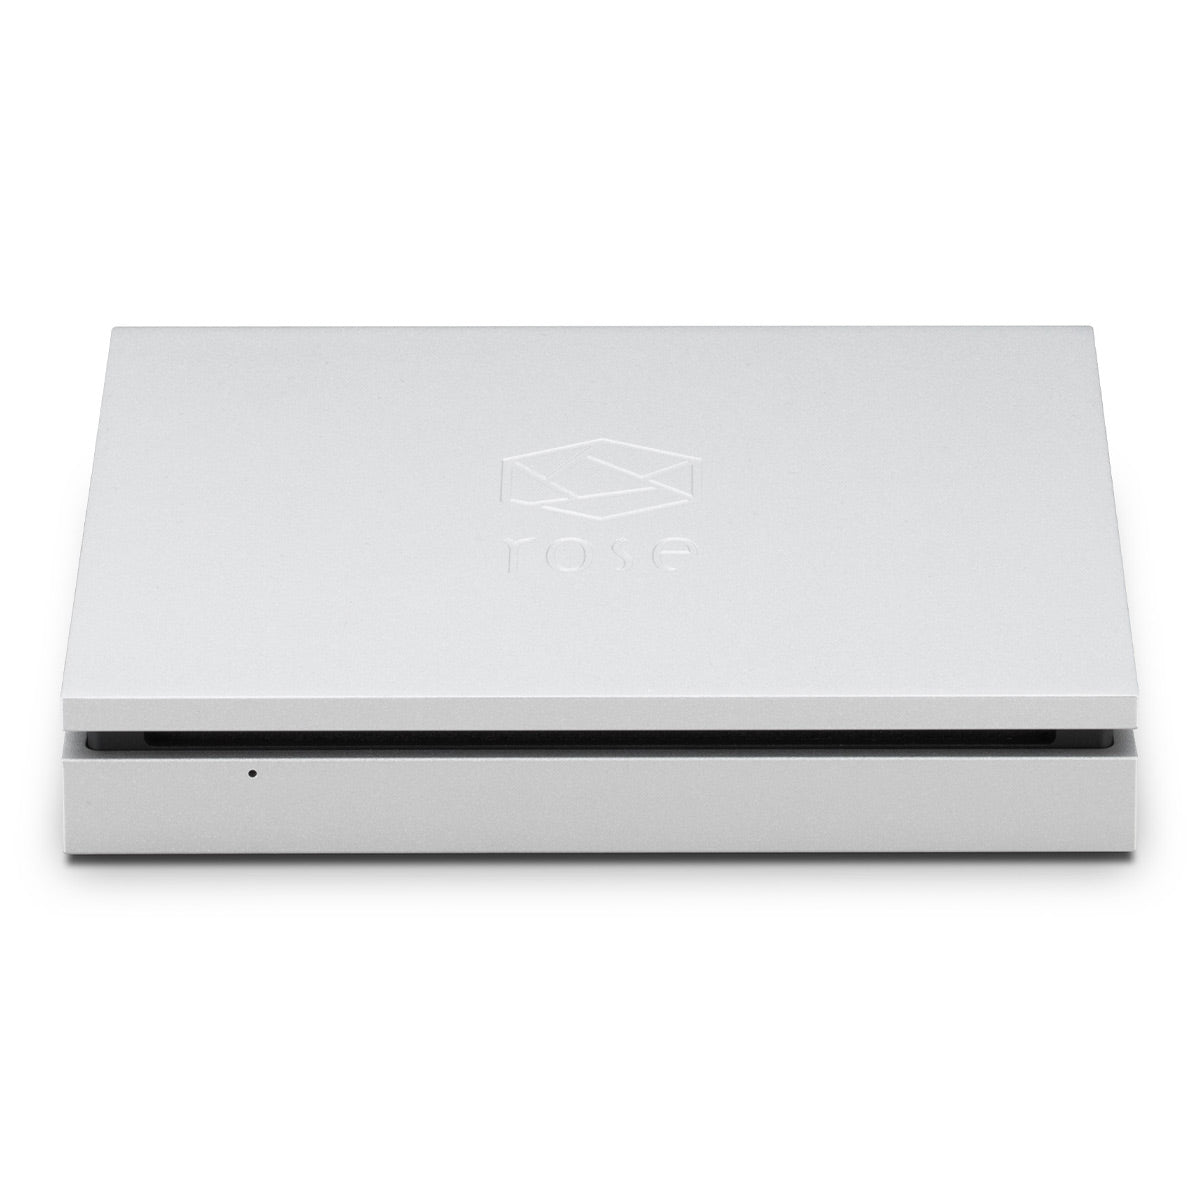 HiFi Rose RS520 Wireless Network Streamer & Integrated Amplifier with Built-In ESS Sabre DAC (Silver) with RSA780 Reference CD Drive and Ripper